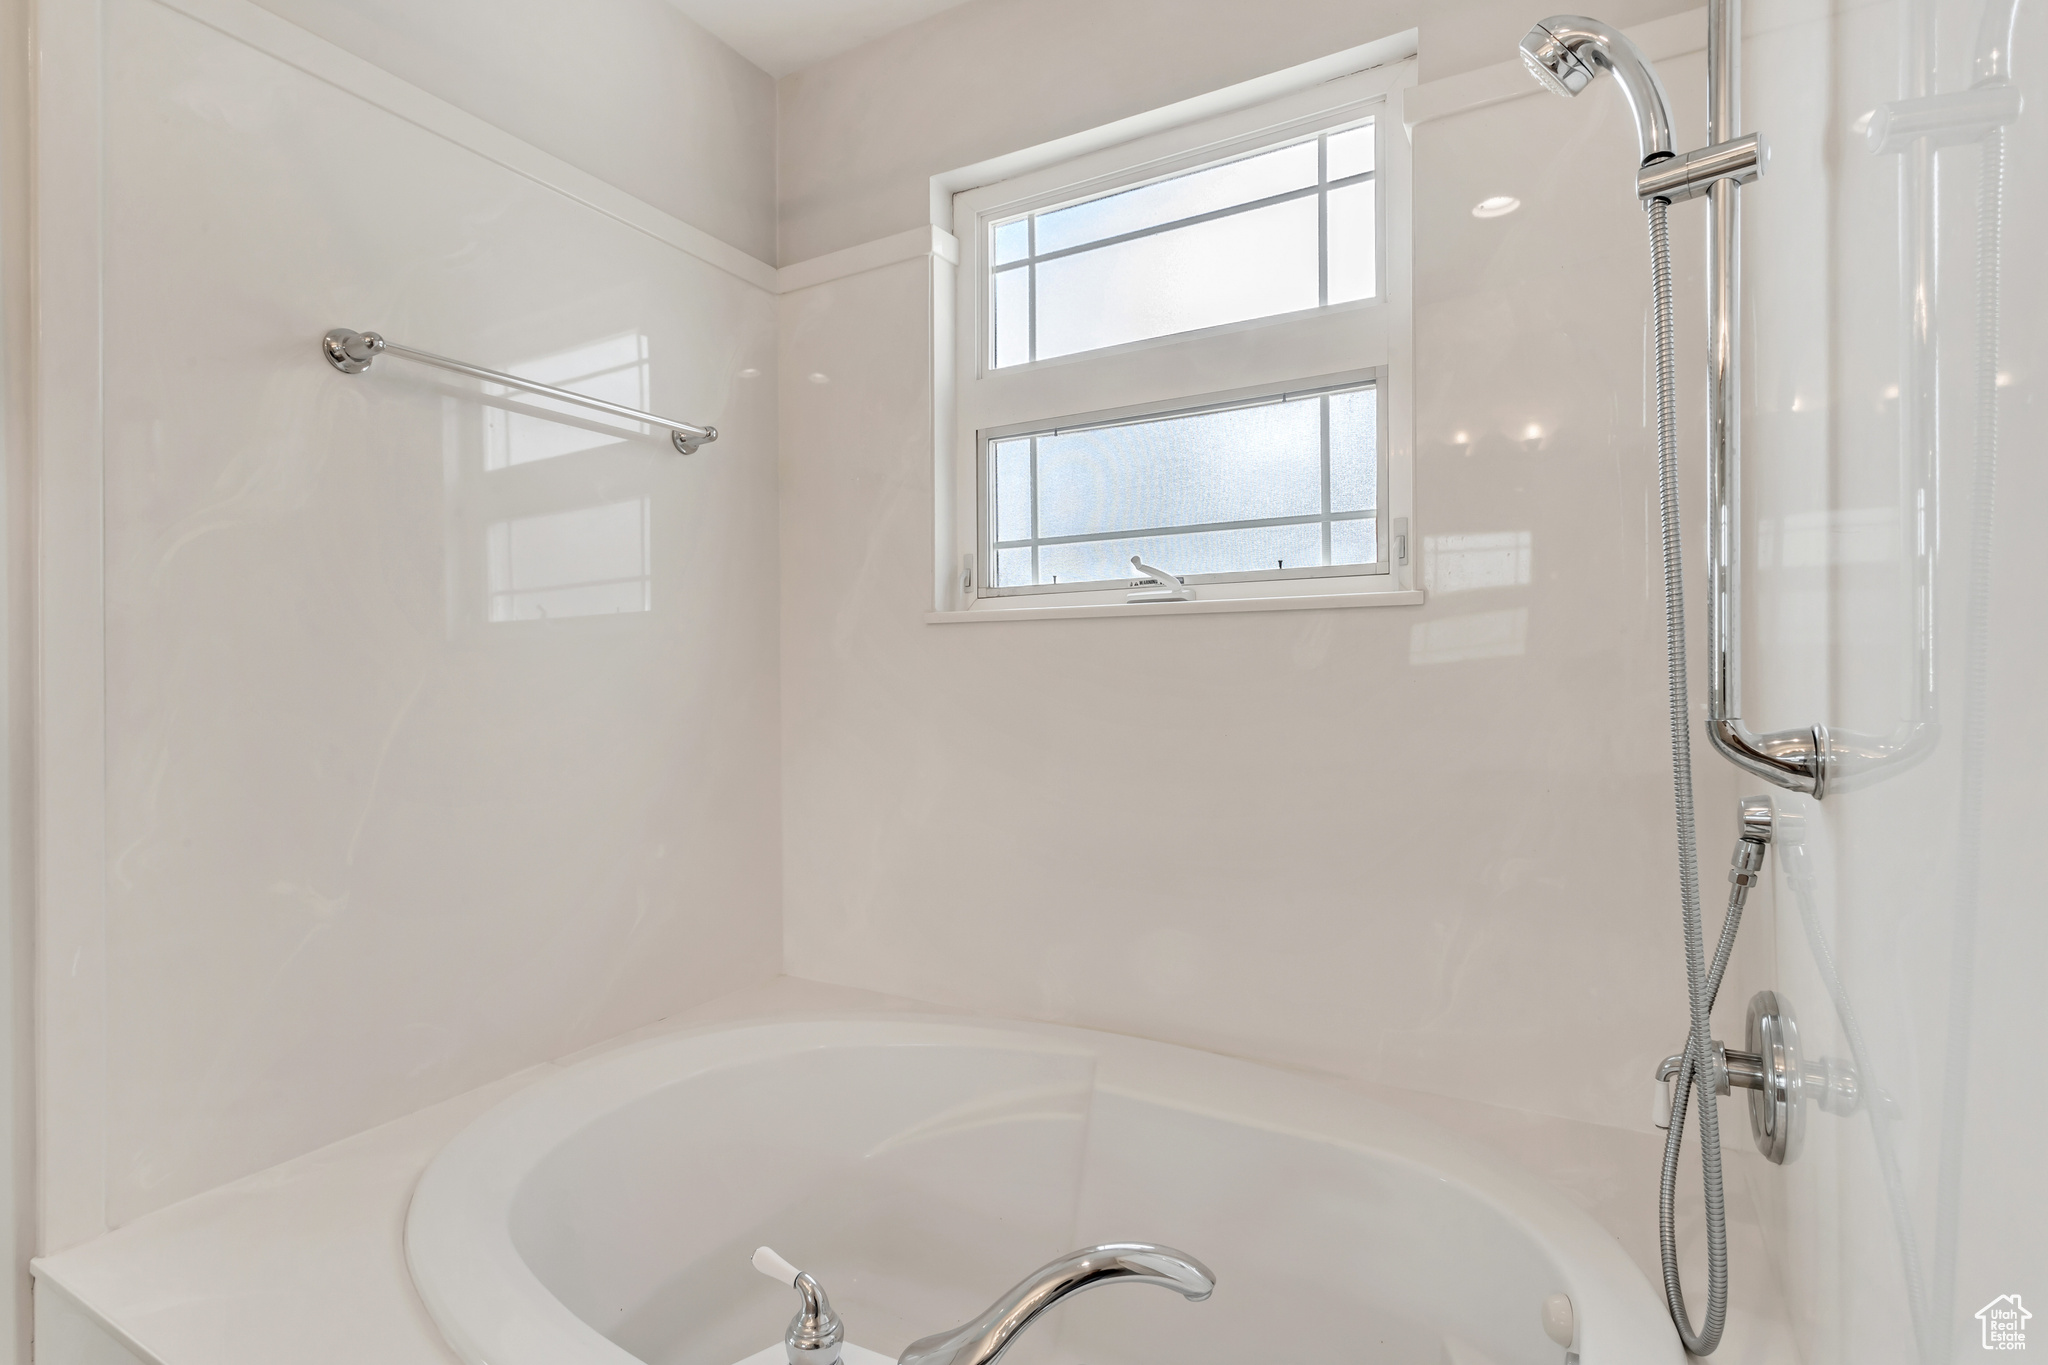 Large soaking tub and shower in primary suite on second floor